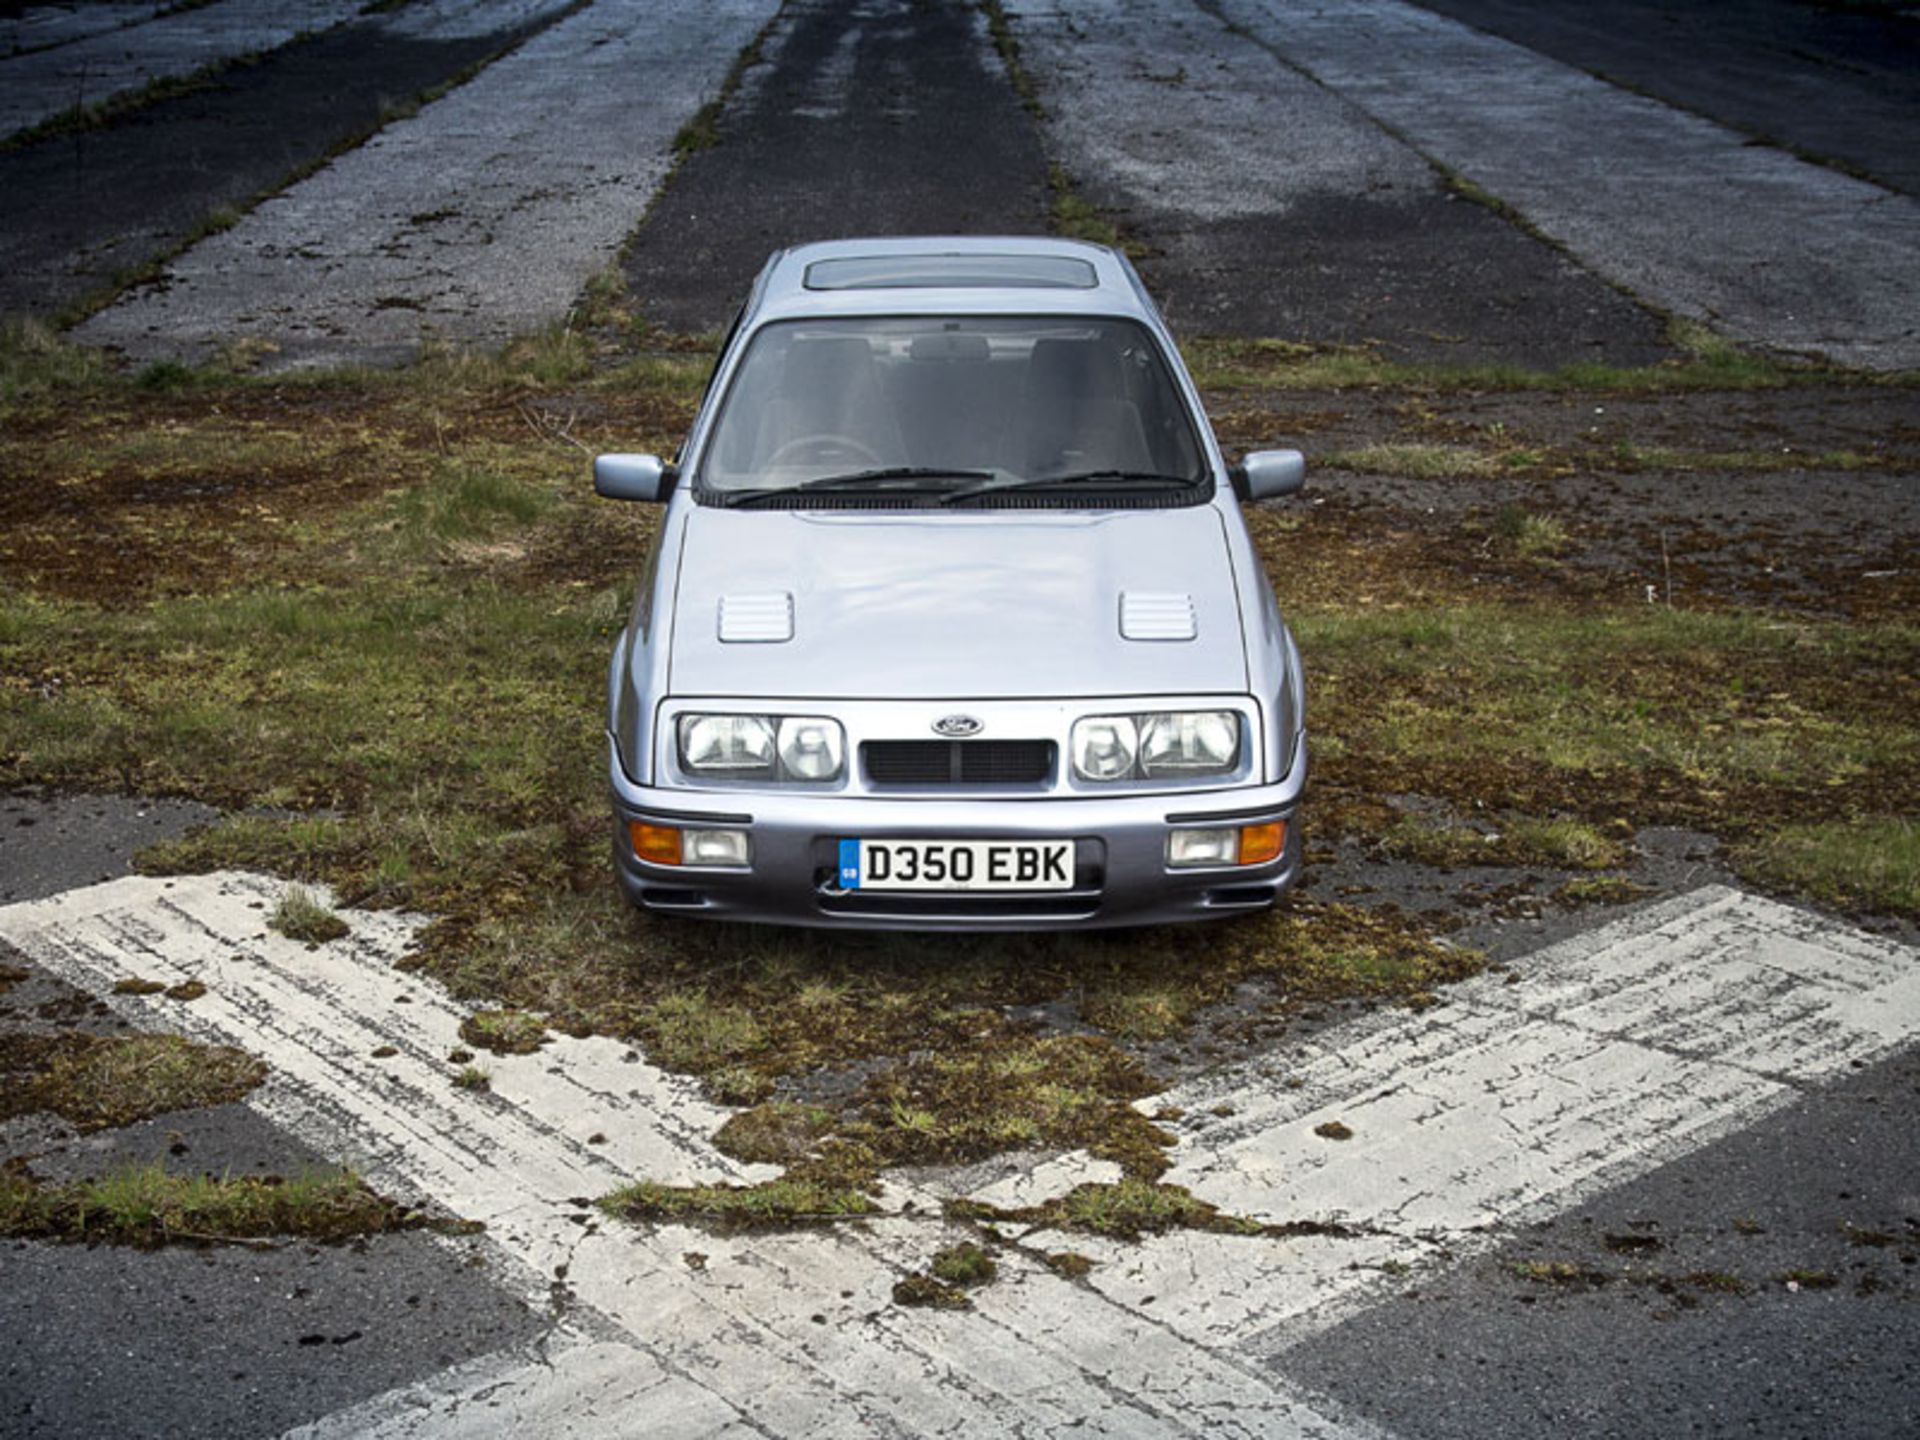 1986 Ford Sierra RS Cosworth - Image 2 of 7